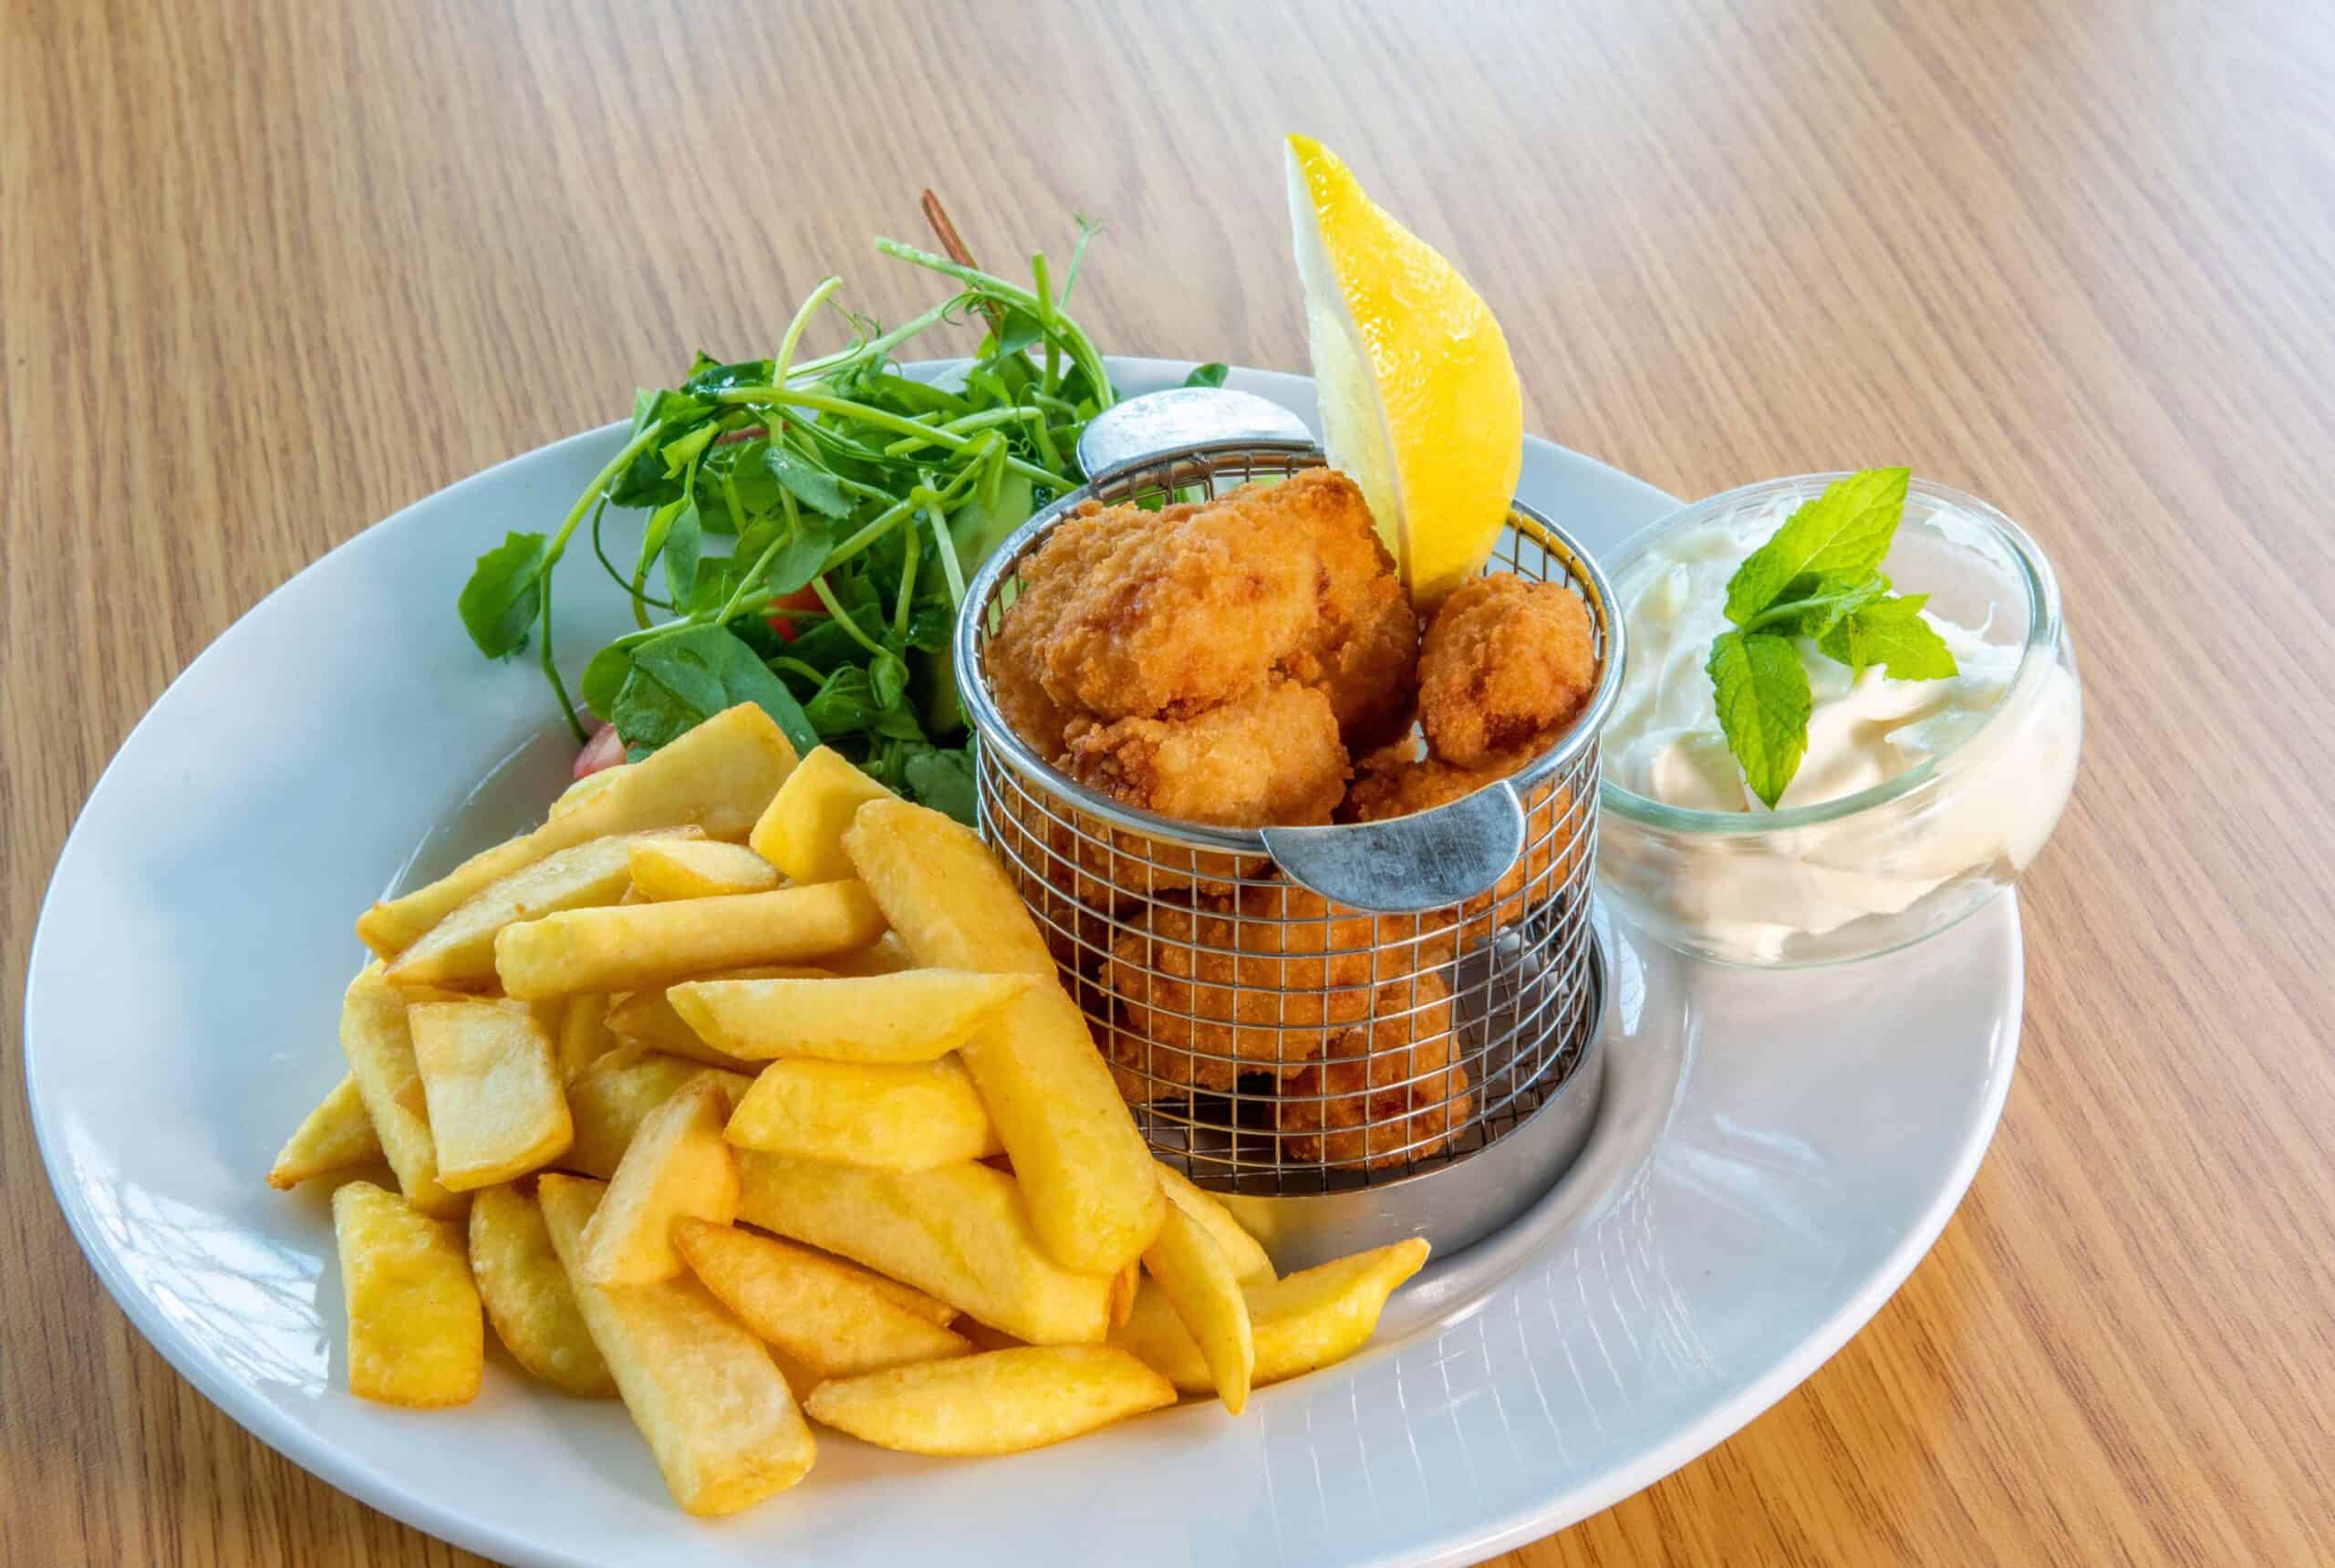 Scampi could vanish from menus as labour shortages hit beleaguered industry